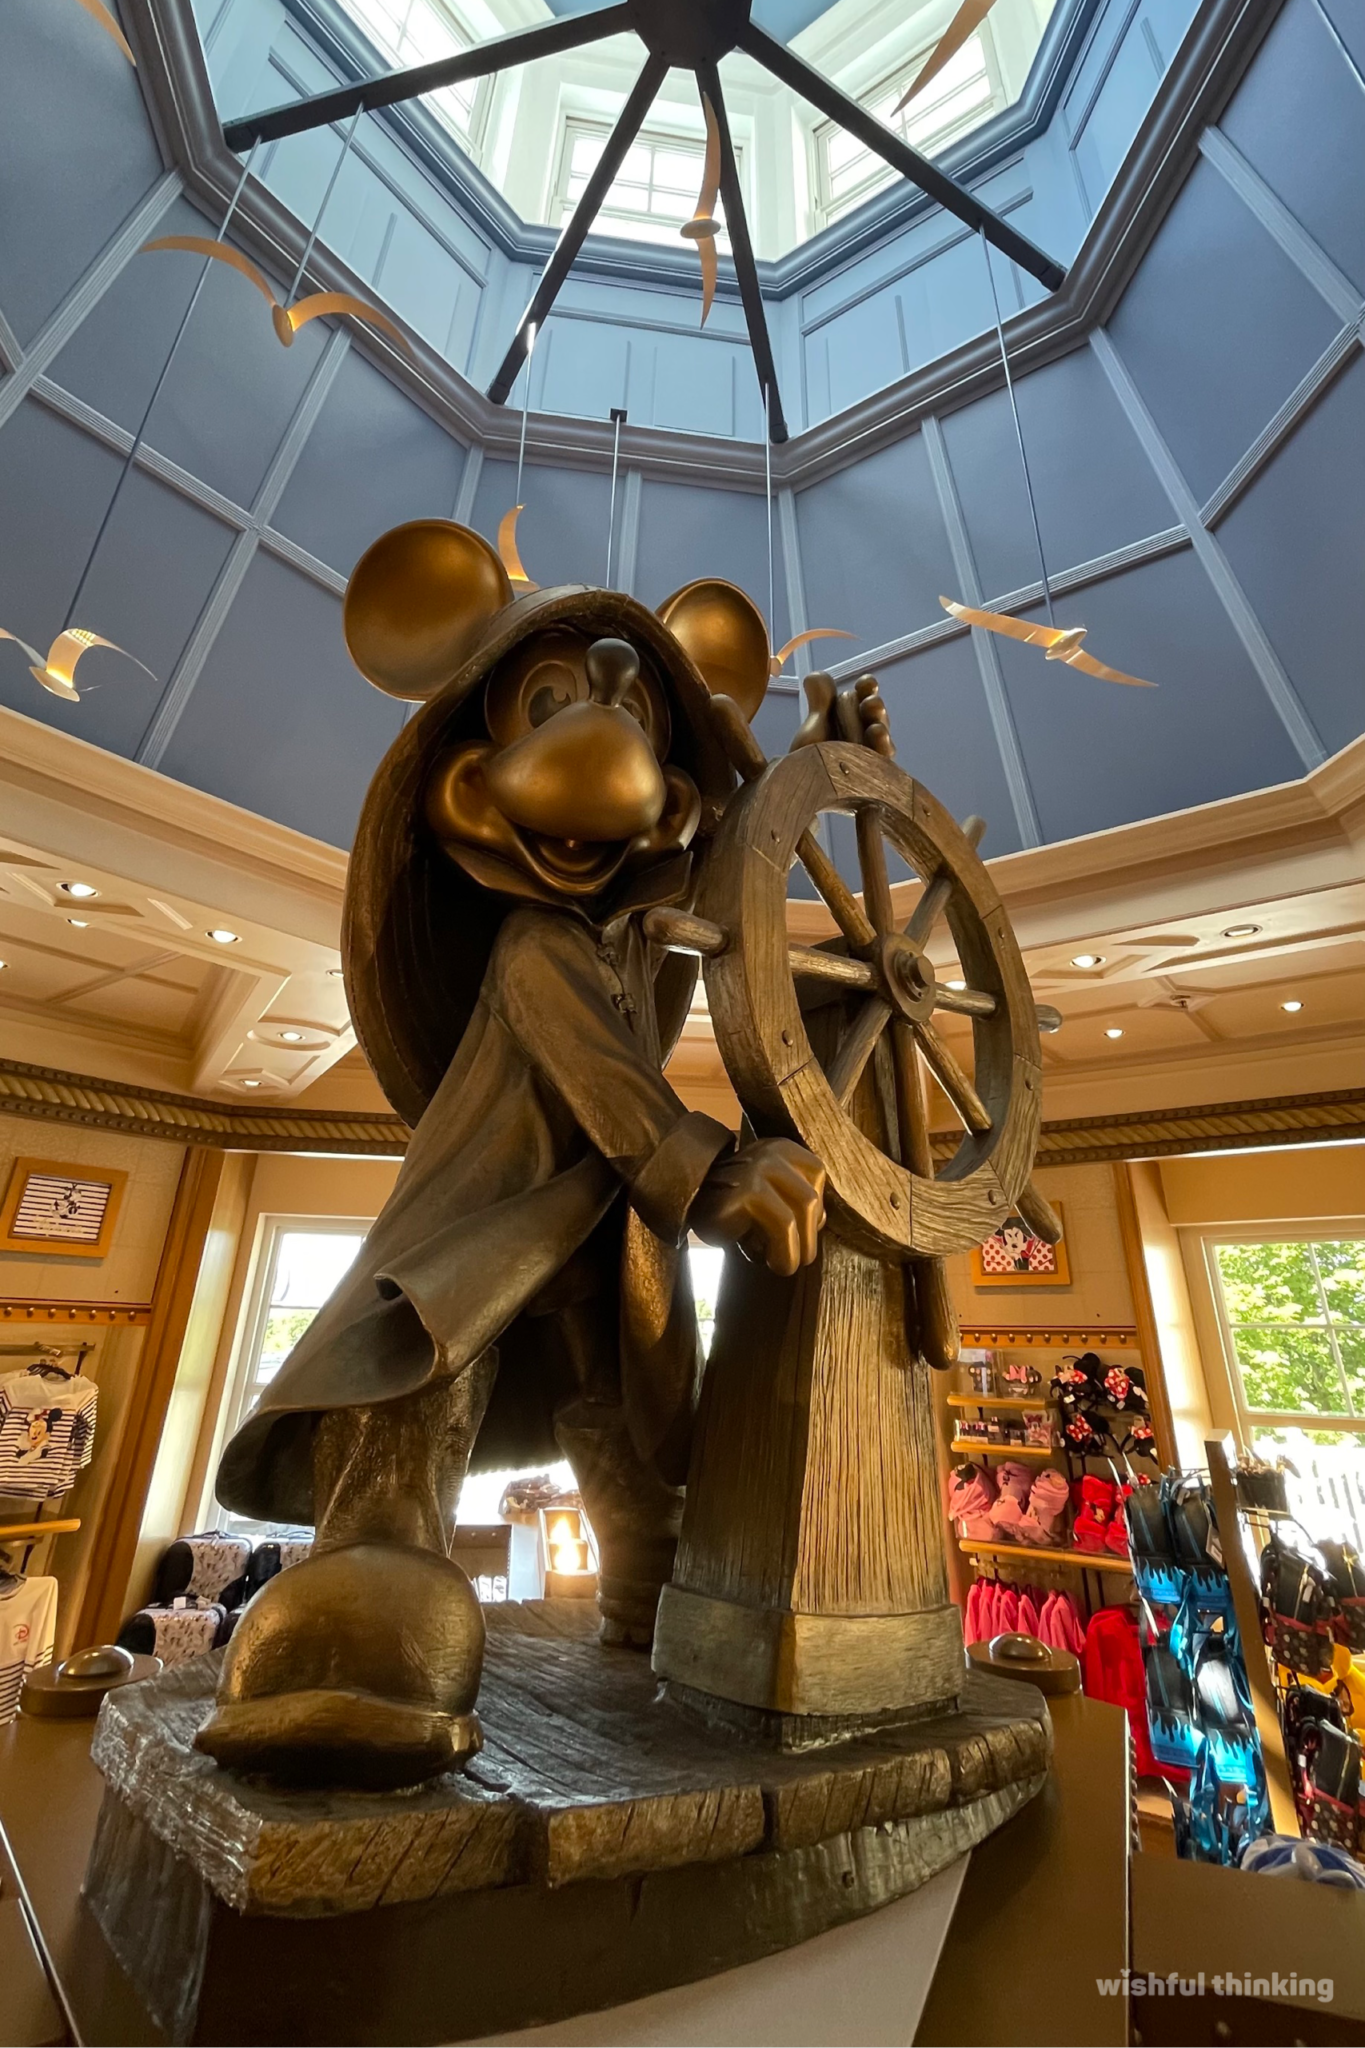 Mickey Mouse stands at the wheel of a ship in the lobby of Disney's Newport Bay Club Resort in Marne-la-Valee, France